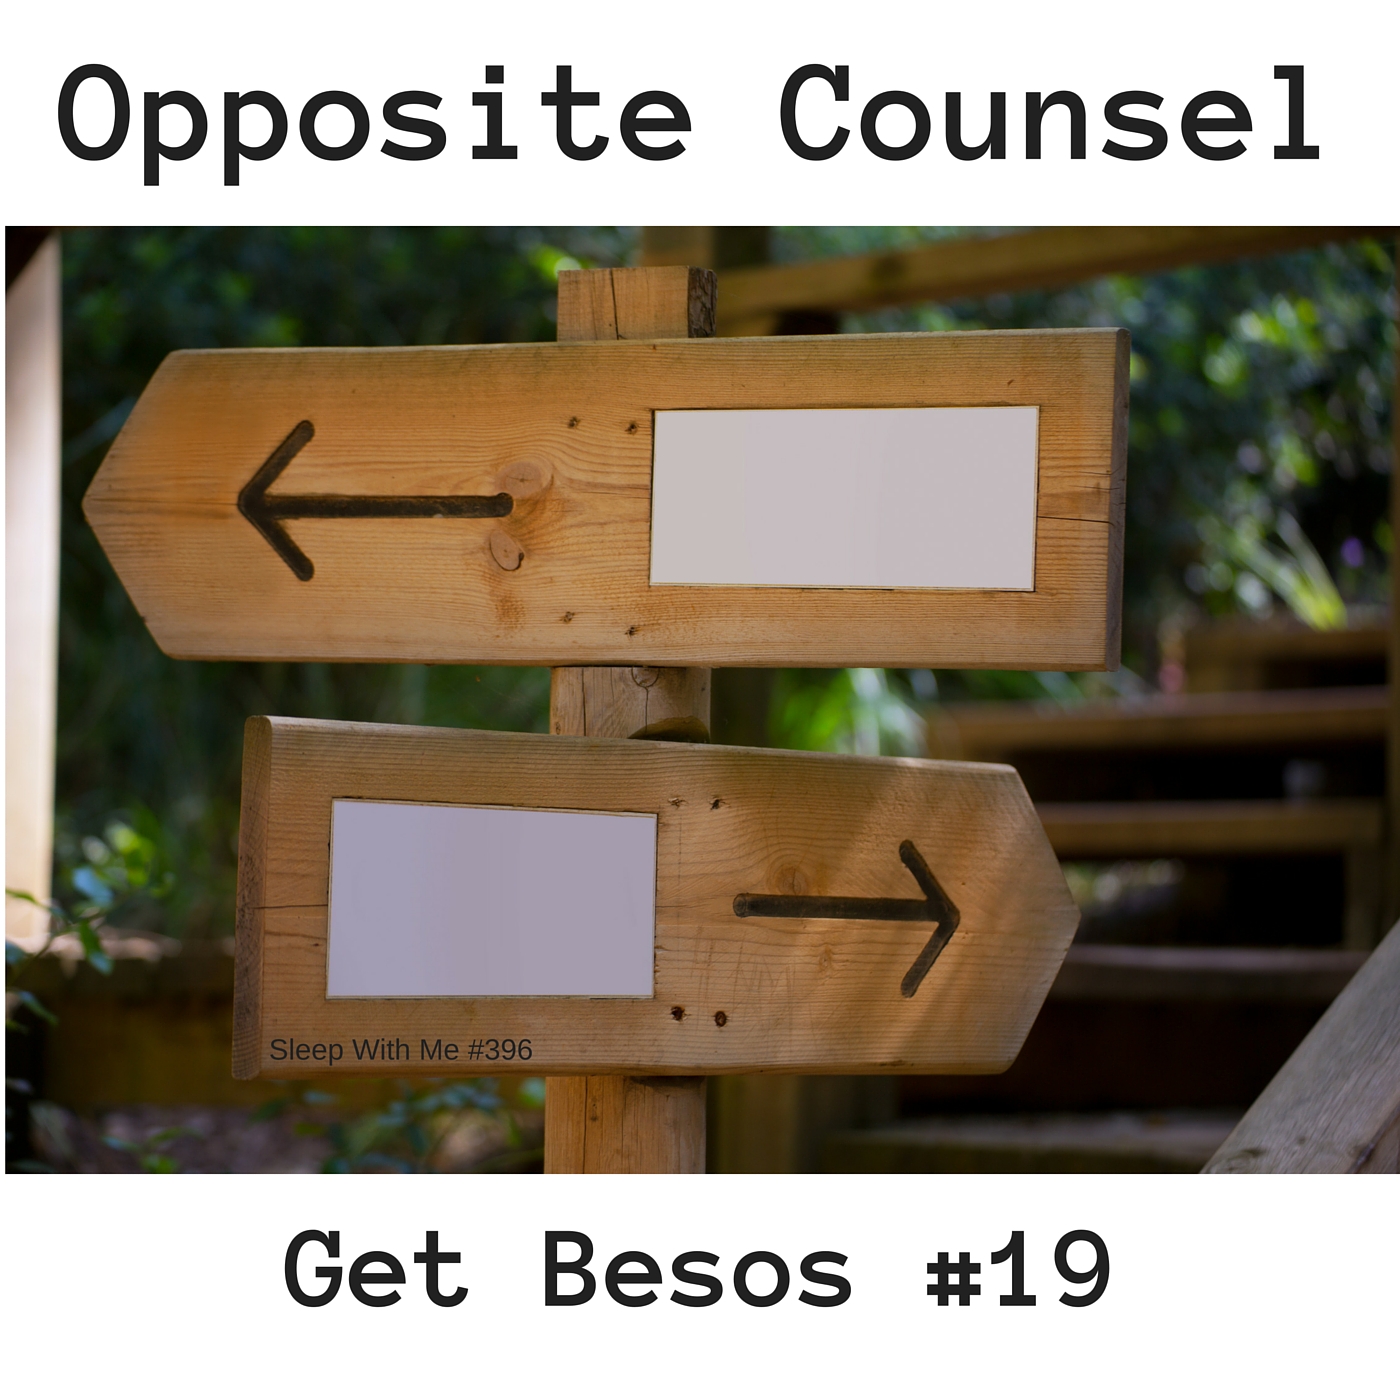 Opposite Counsel